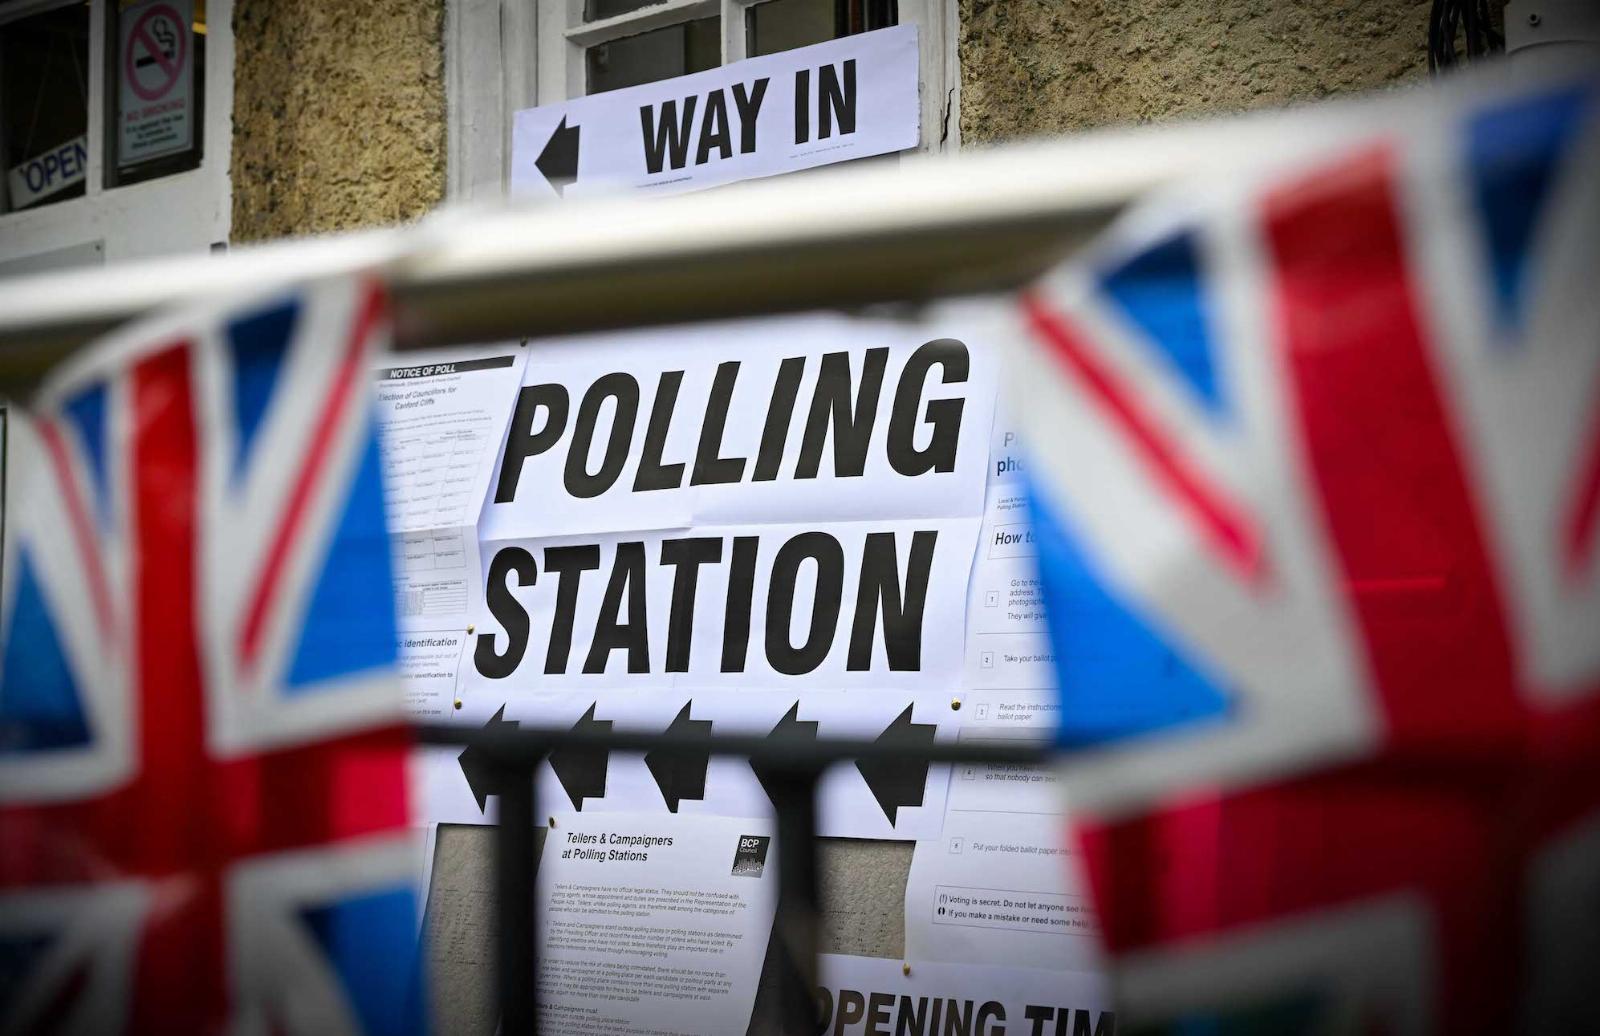 Parsing the UK voter register cyberattack